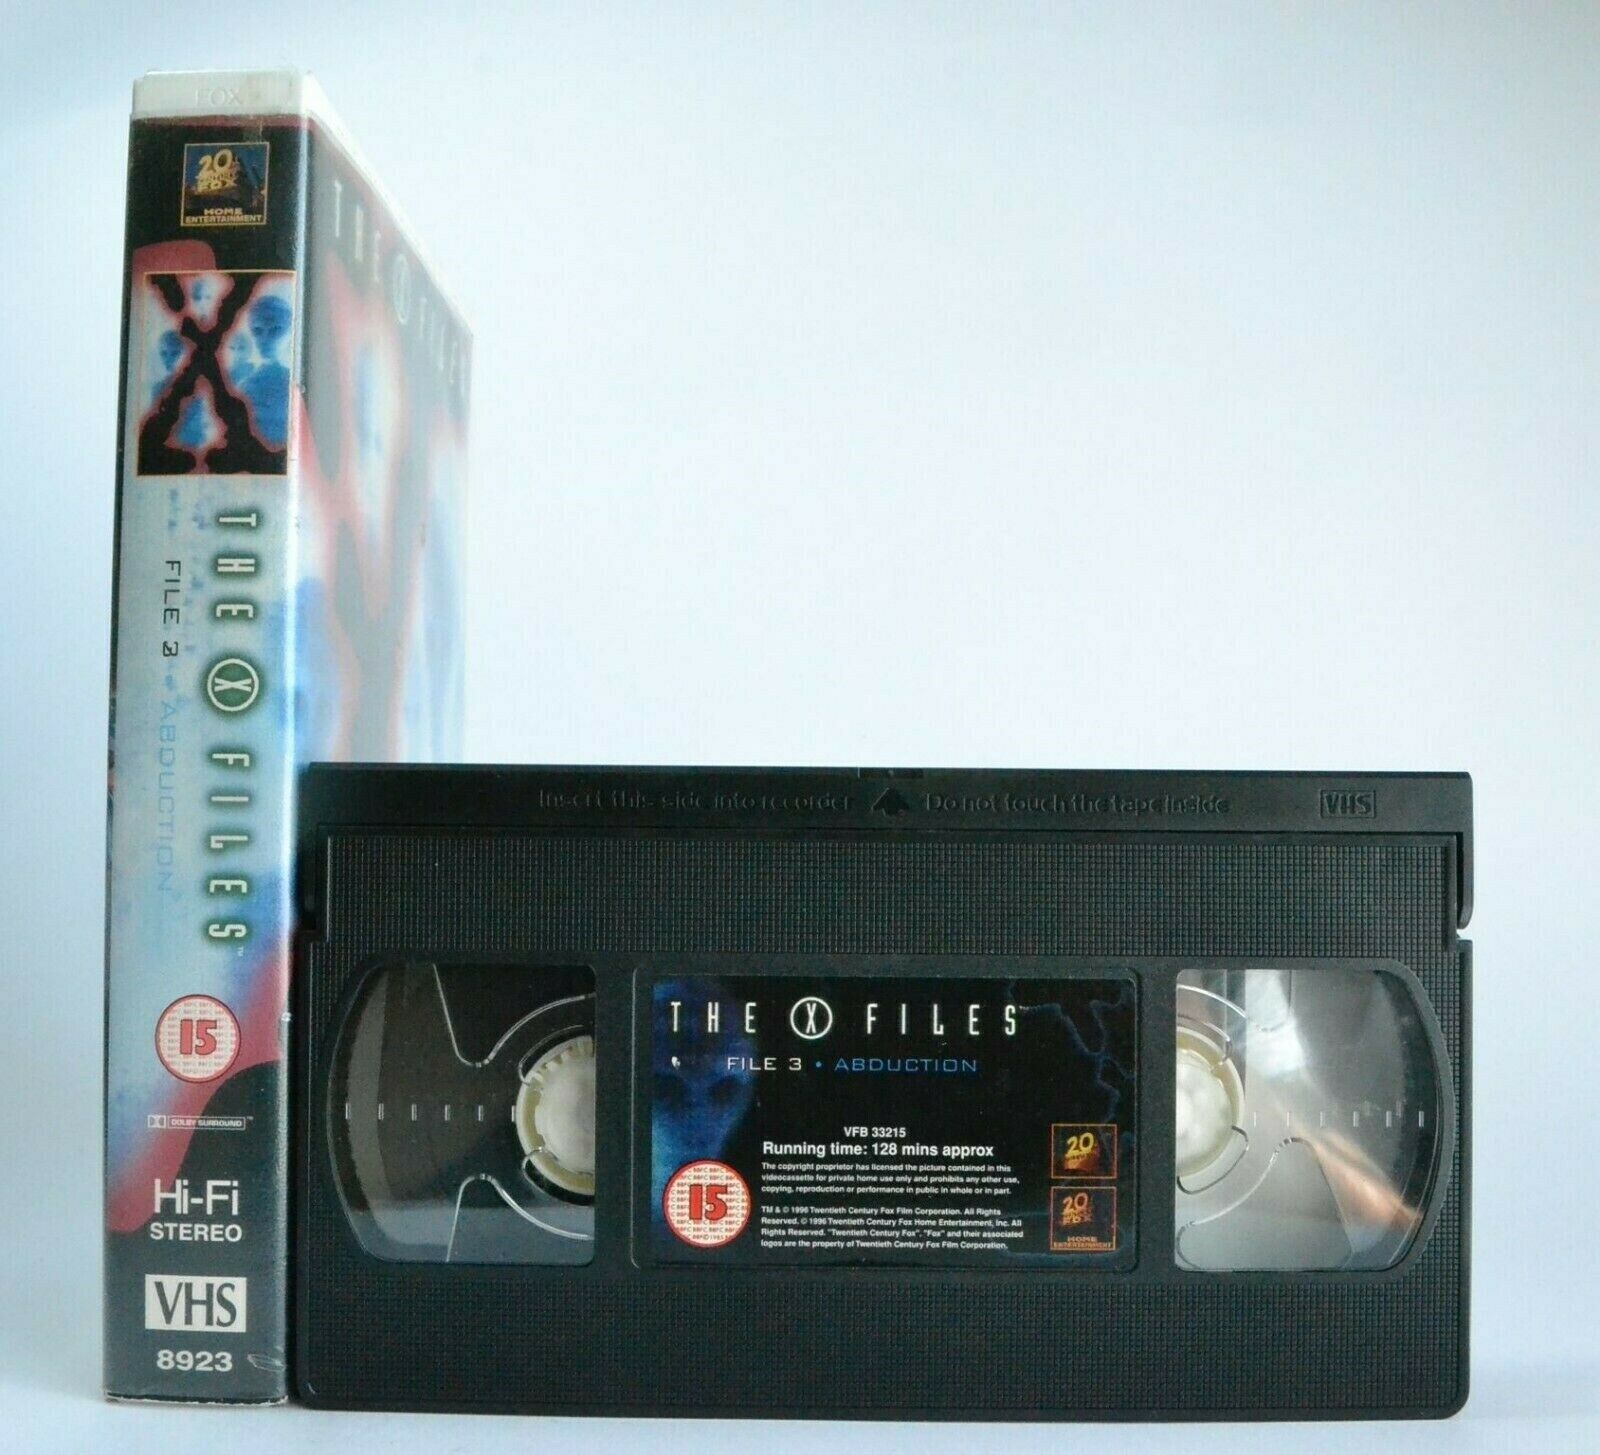 The X-Files:Abduction (1995) - Sci-Fi TV Show - Large Box - David Duchovny - VHS-